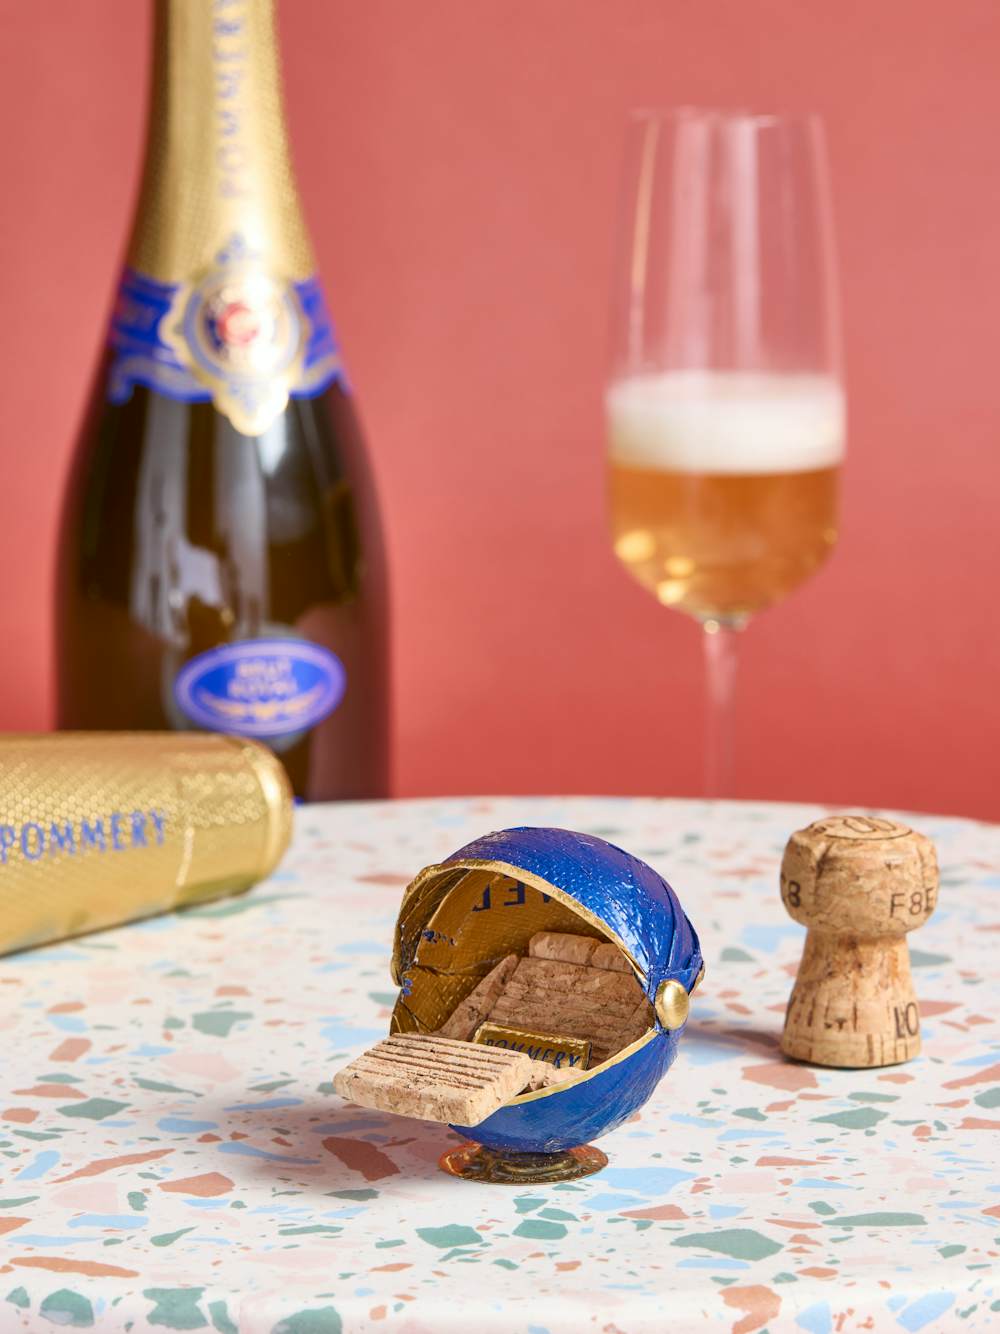 Pommery Prize 2022 Champagne Chair Winner